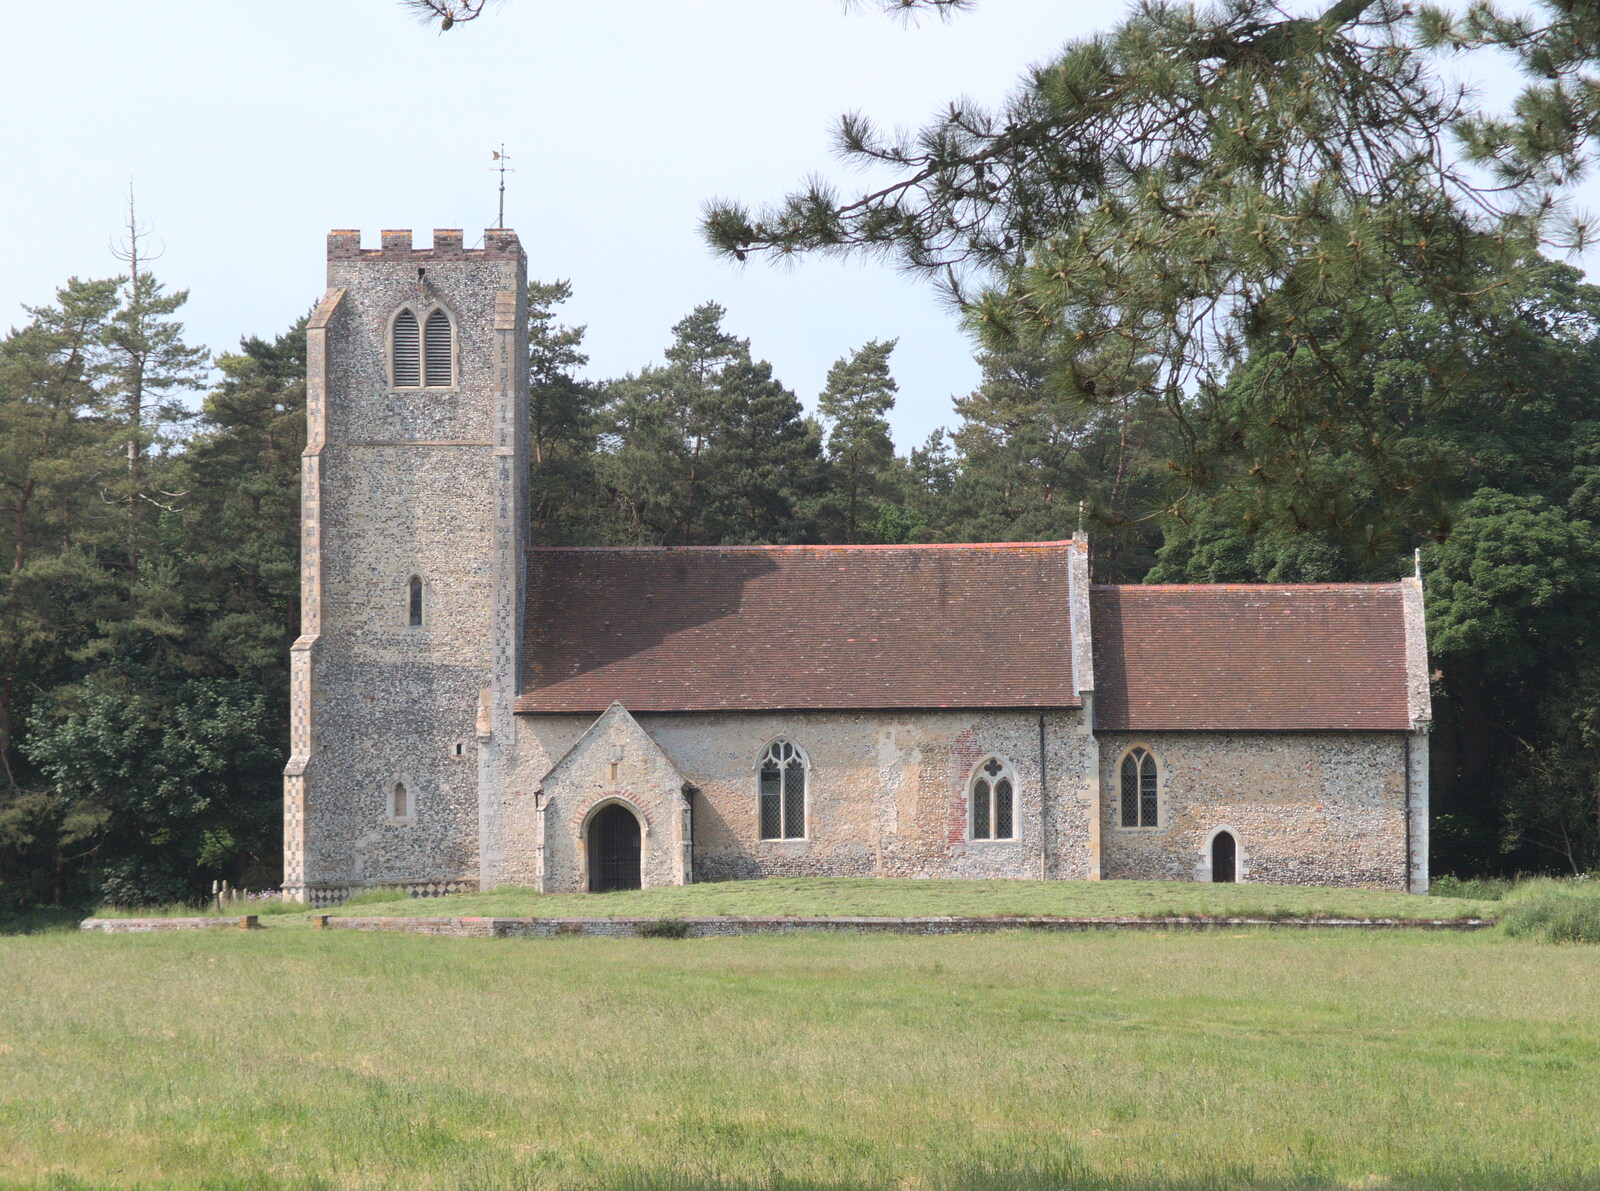 All Saints Church, West Harling from Dower House Camping, West Harling, Norfolk - 27th May 2018